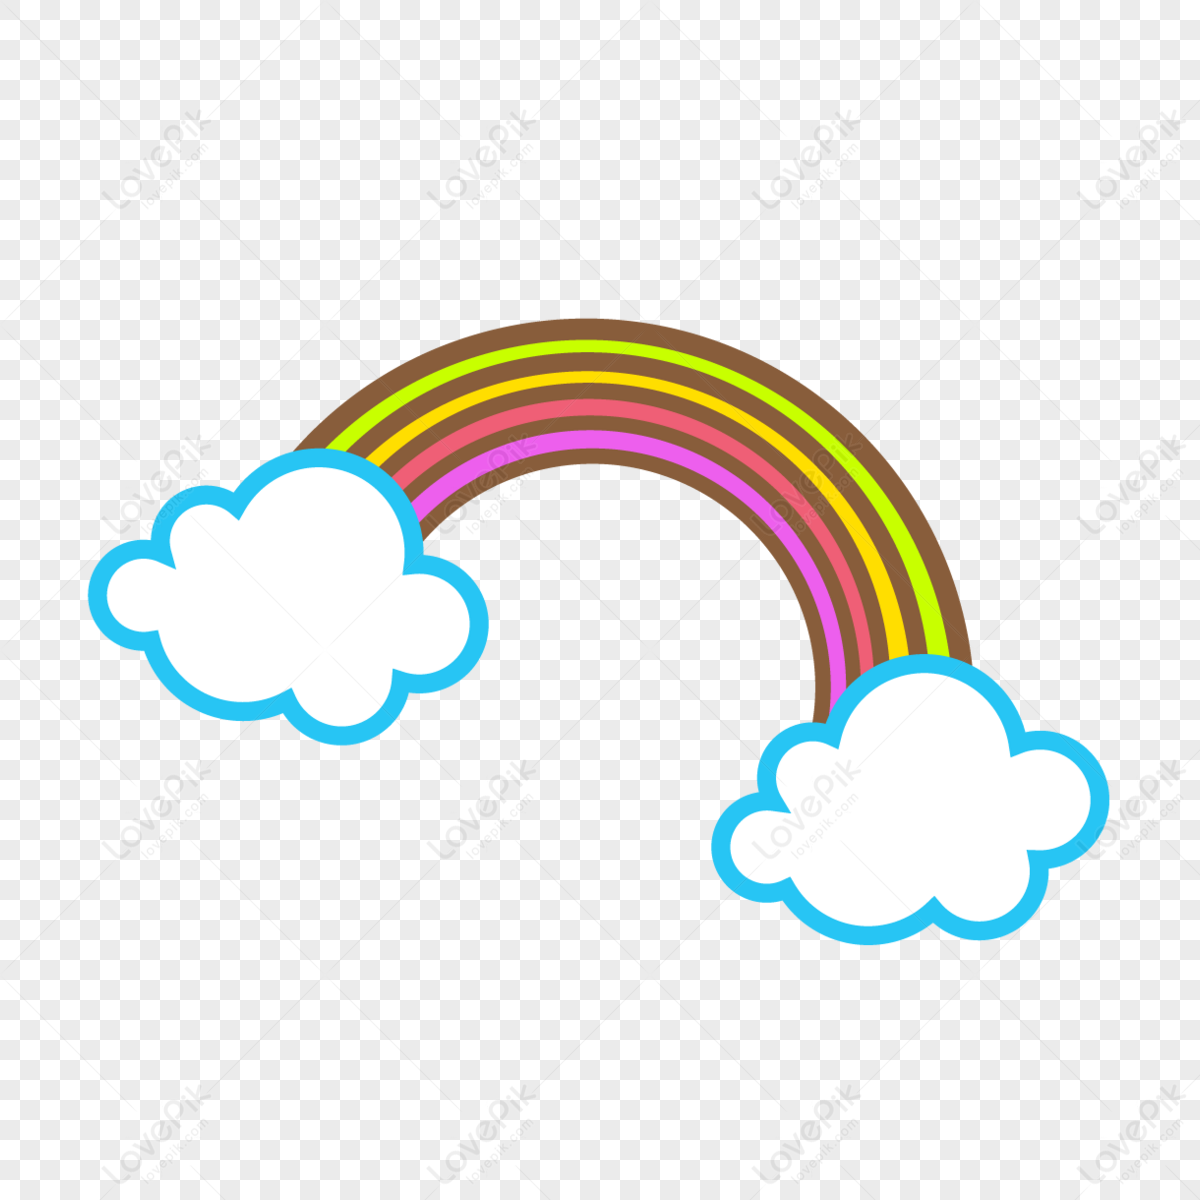 Cartoon rainbow images hd pictures for free vectors download